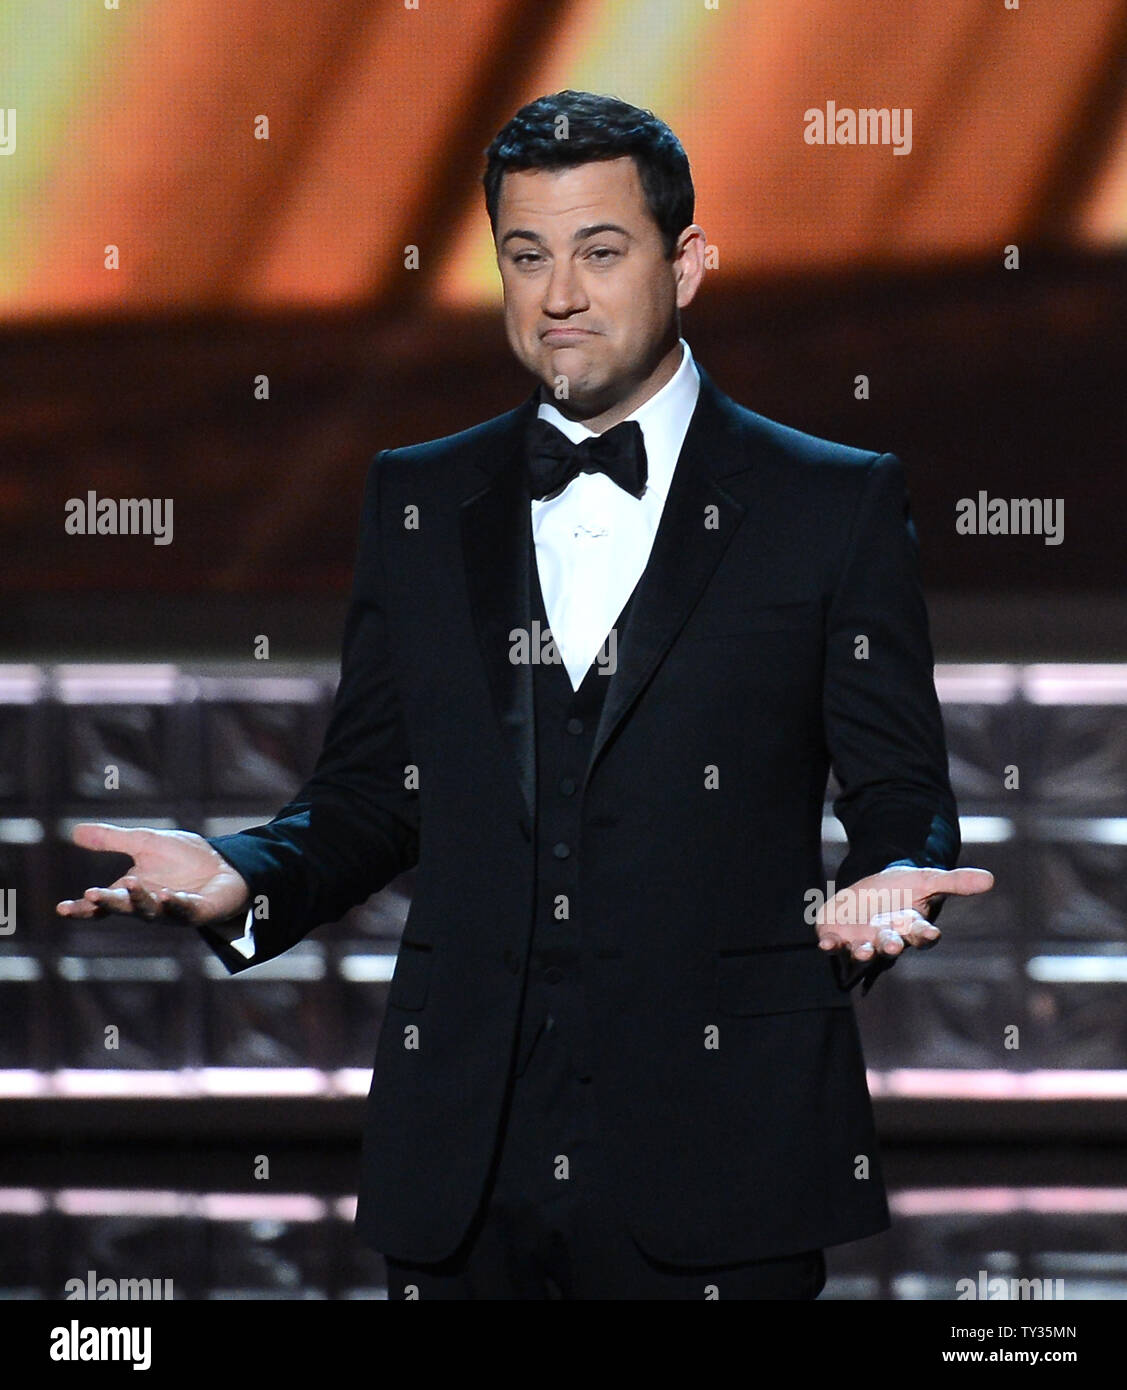 Host Jimmy Kimmel appears onstage at the the 64th Primetime Emmys at the Nokia Theatre in Los Angeles on September 23, 2012. UPI/Jim Ruymen Stock Photo